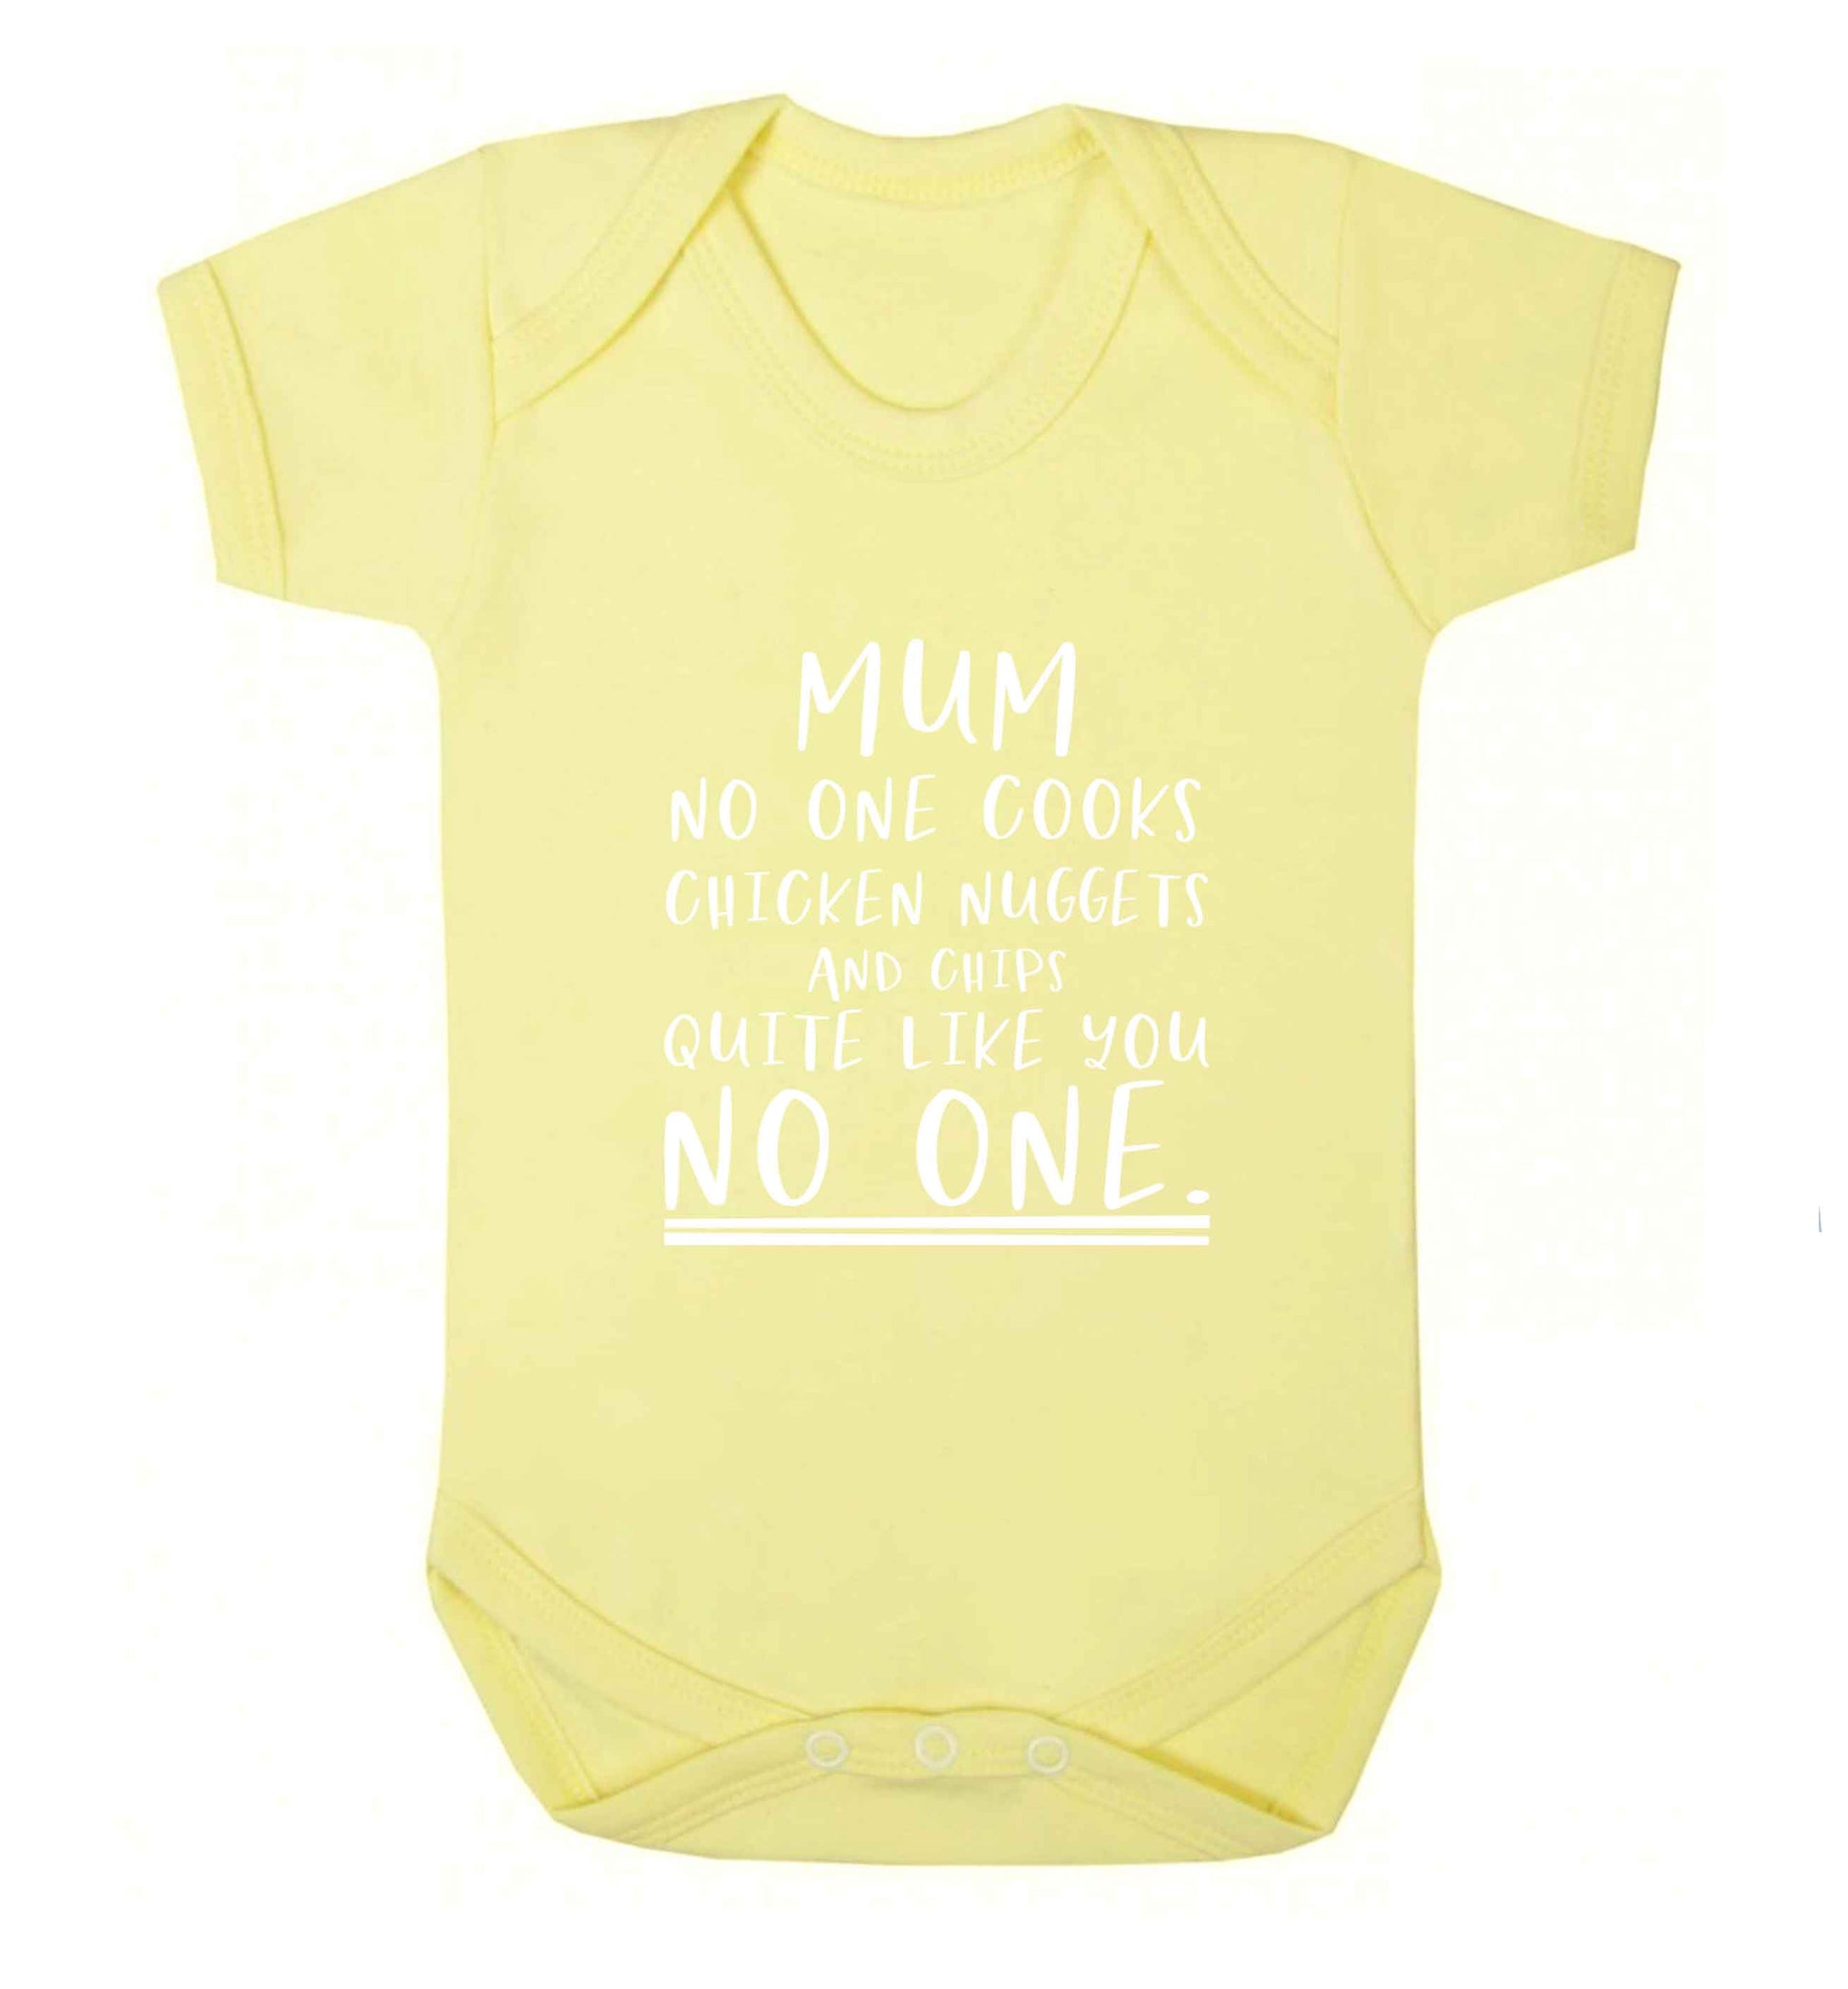 Super funny sassy gift for mother's day or birthday!  Mum no one cooks chicken nuggets and chips like you no one baby vest pale yellow 18-24 months